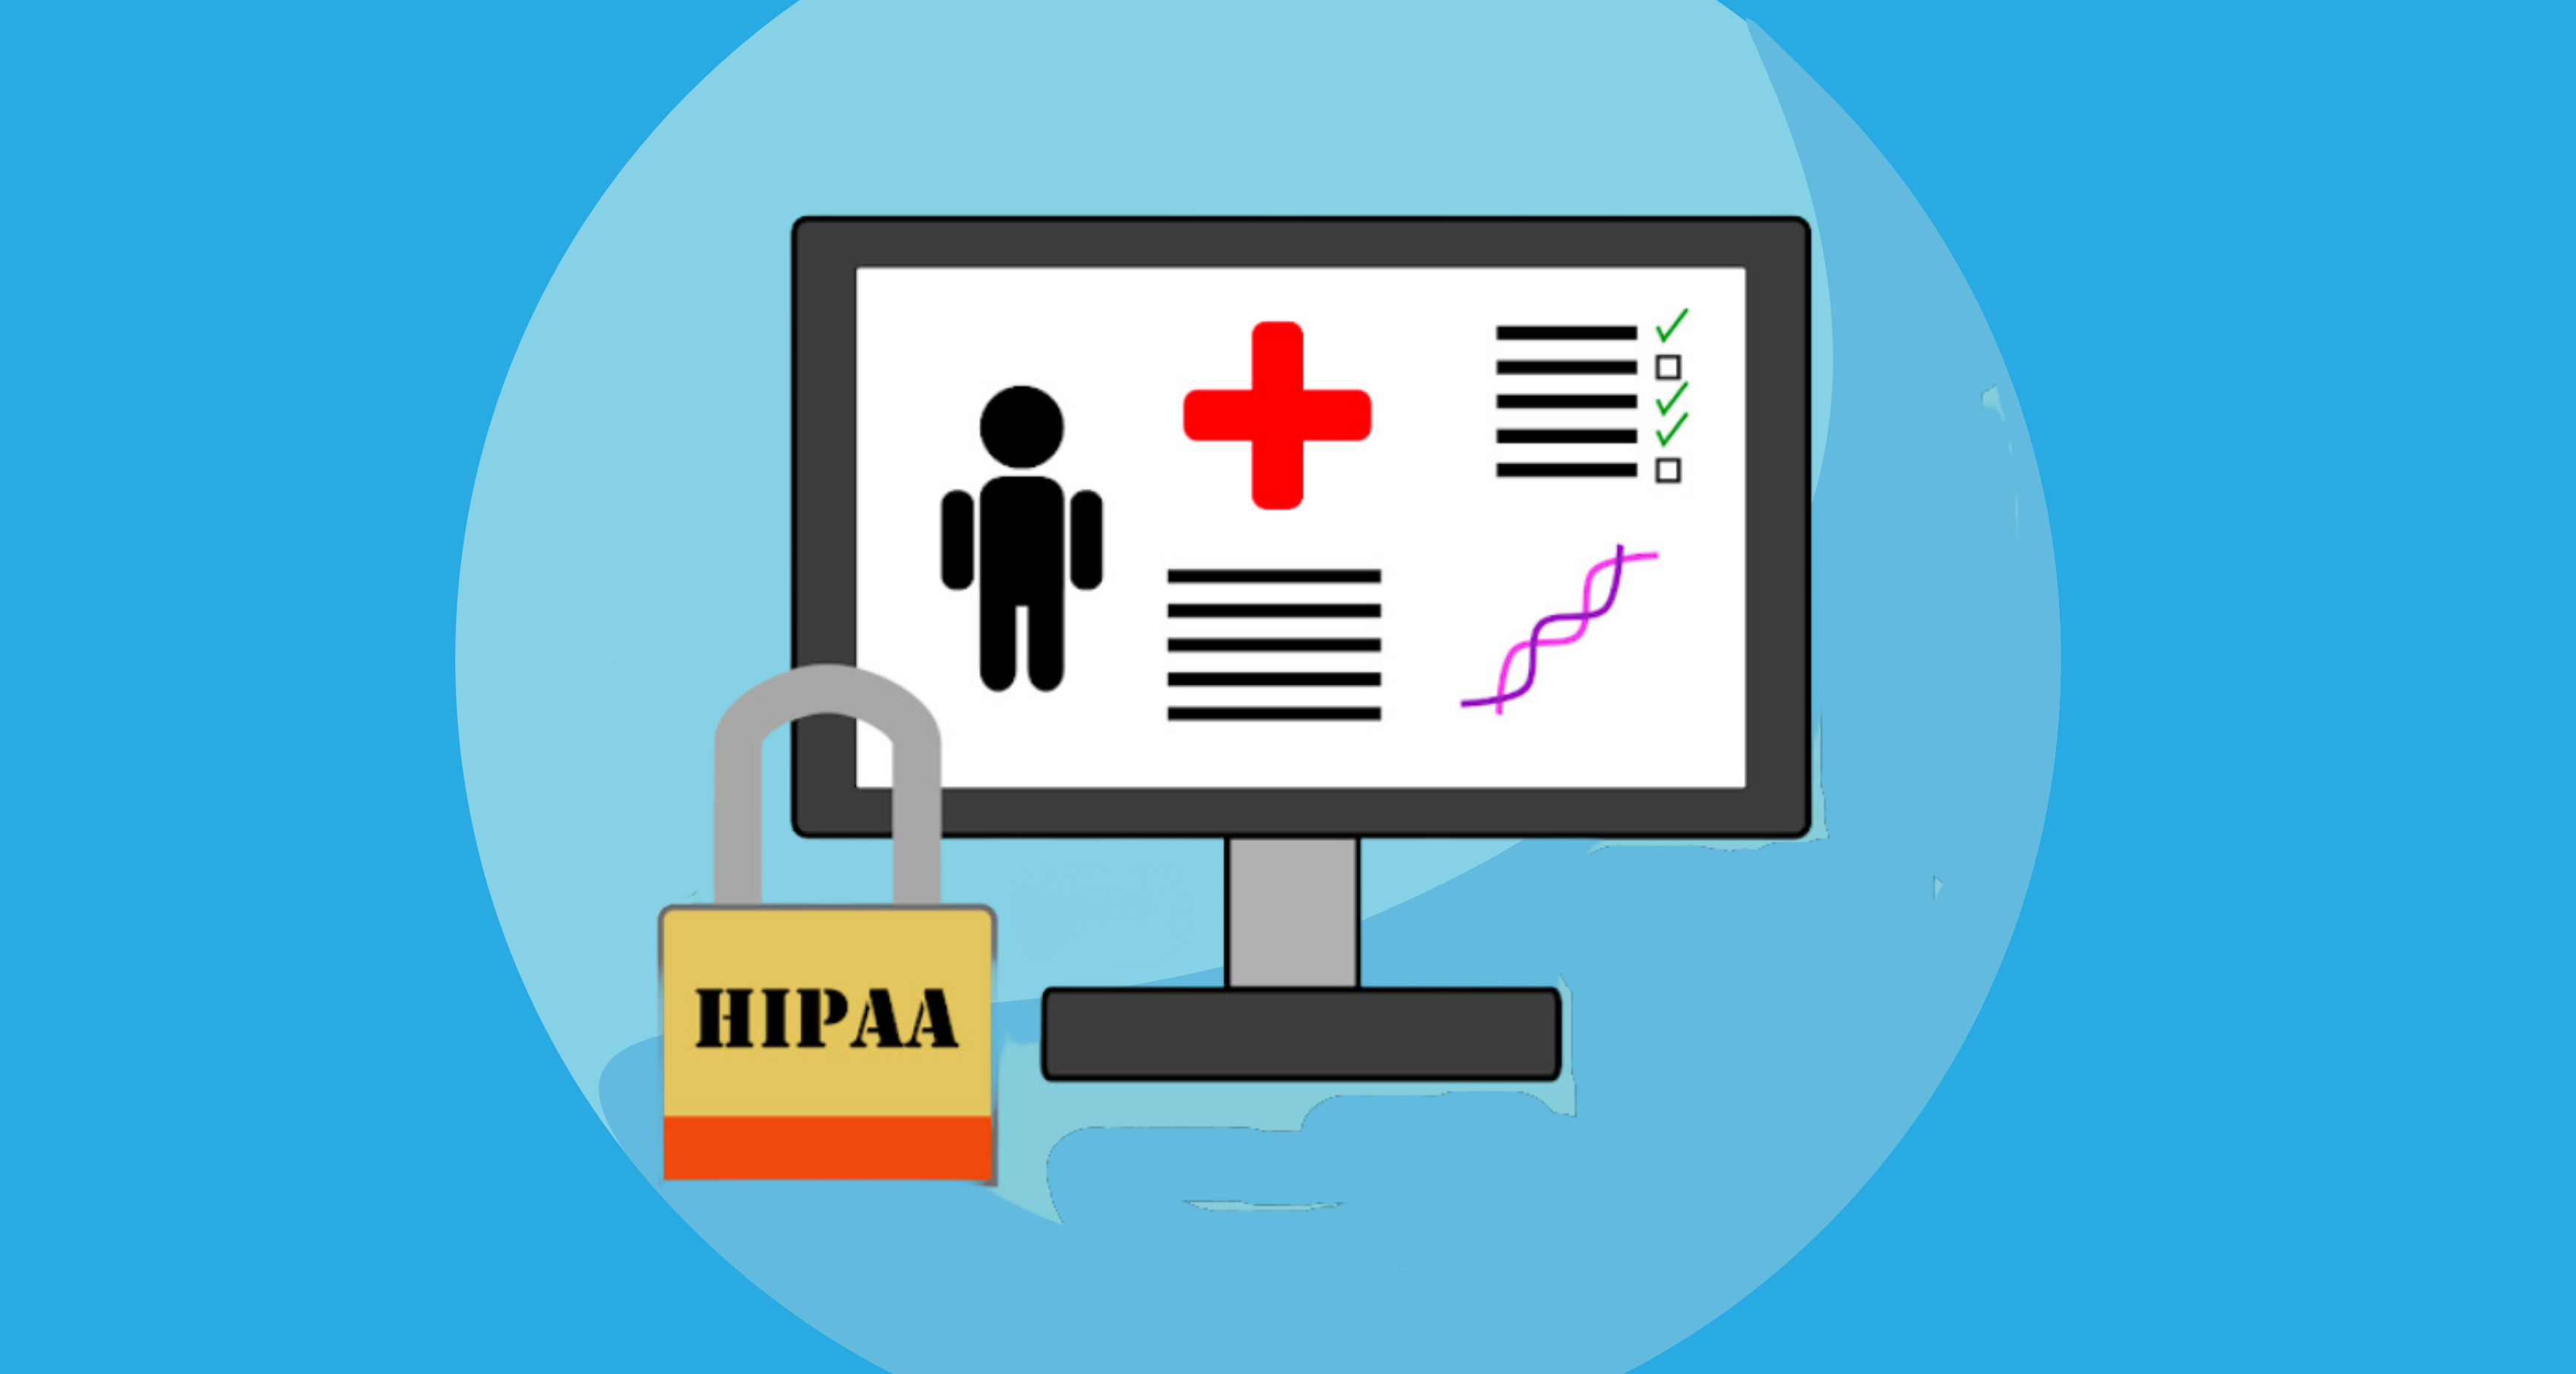 hipaa and privacy act training